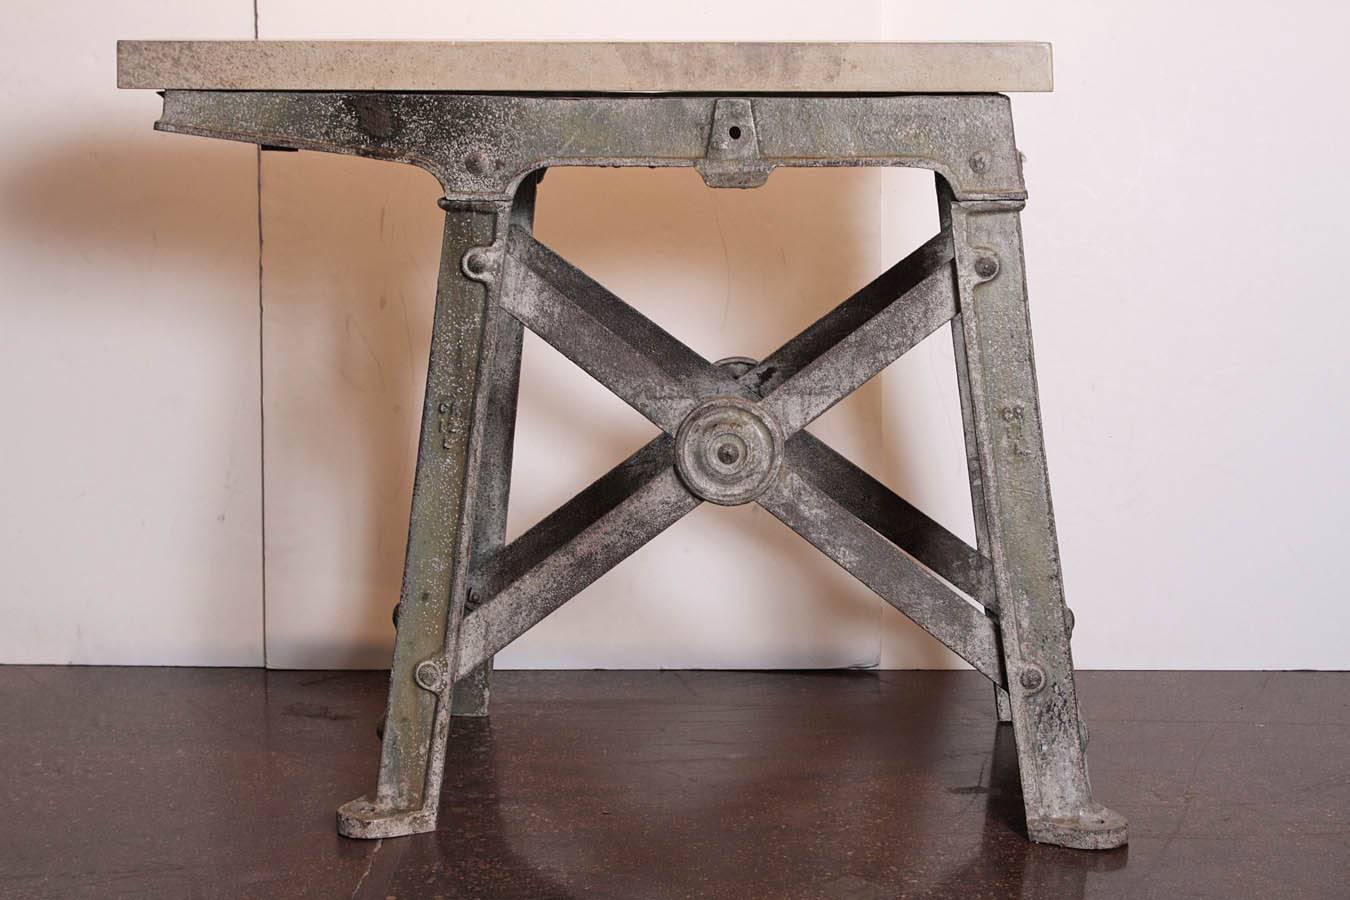 
Vintage, French Industrial machine mount.
Cast iron base with exhibiting patina of age.
2